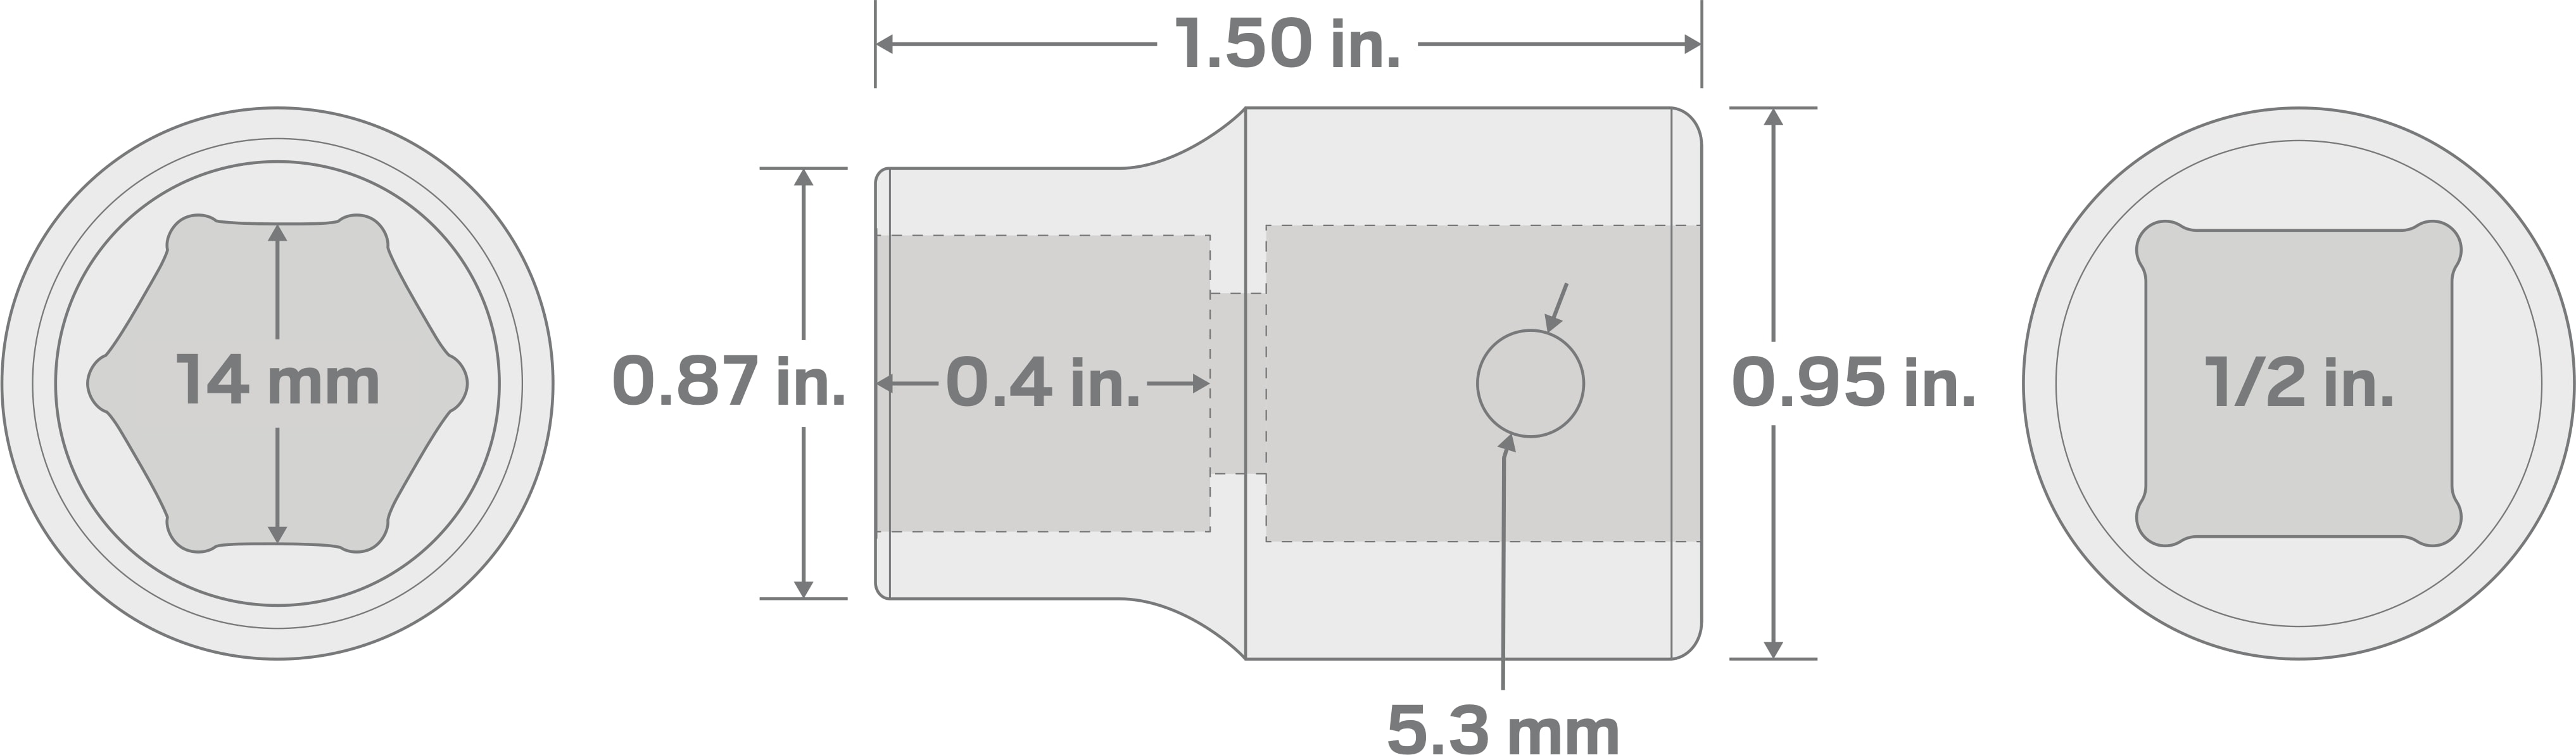 Specs for 1/2 Inch Drive x 14 mm 6-Point Impact Socket